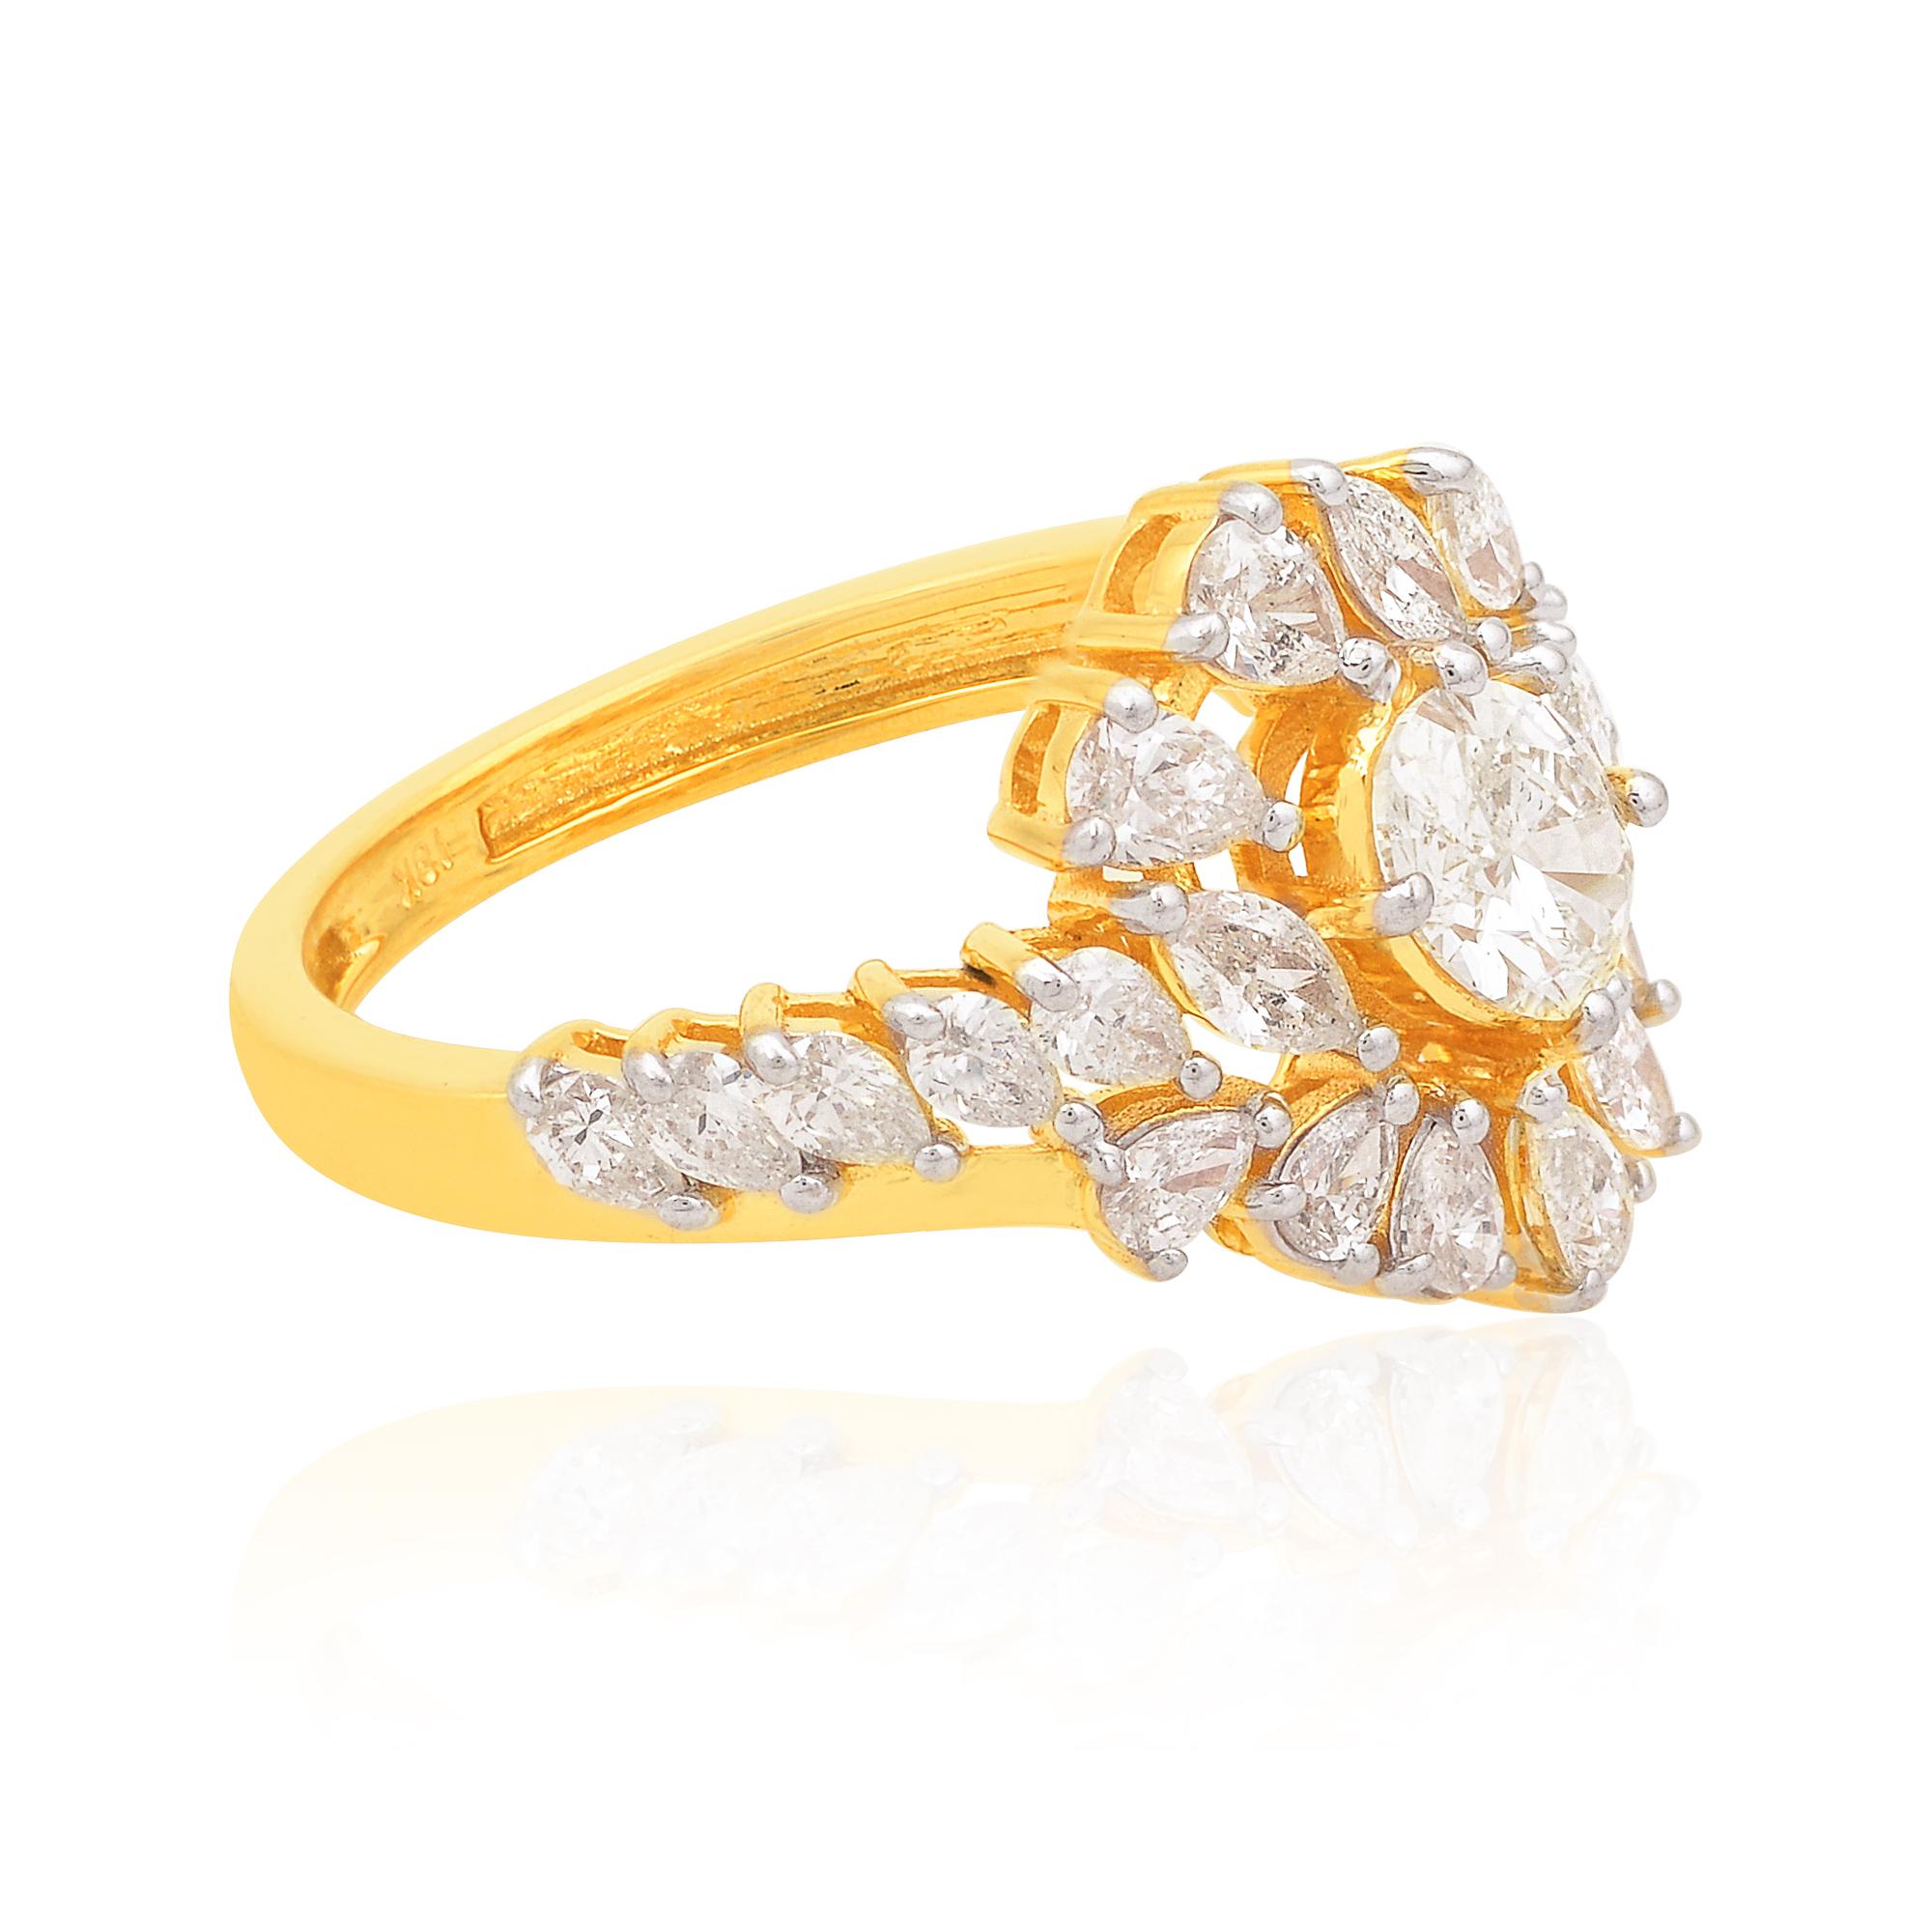 Item Code :- SER-2965
Gross Wt. :- 4.48 gm
18k Solid Yellow Gold Wt. :- 4.12 gm
Natural Diamond Wt. :- 1.82 Ct. ( AVERAGE DIAMOND CLARITY SI1-SI2 & COLOR H-I )
Ring Size :- 7 US & All size available

✦ Sizing
.....................
We can adjust most